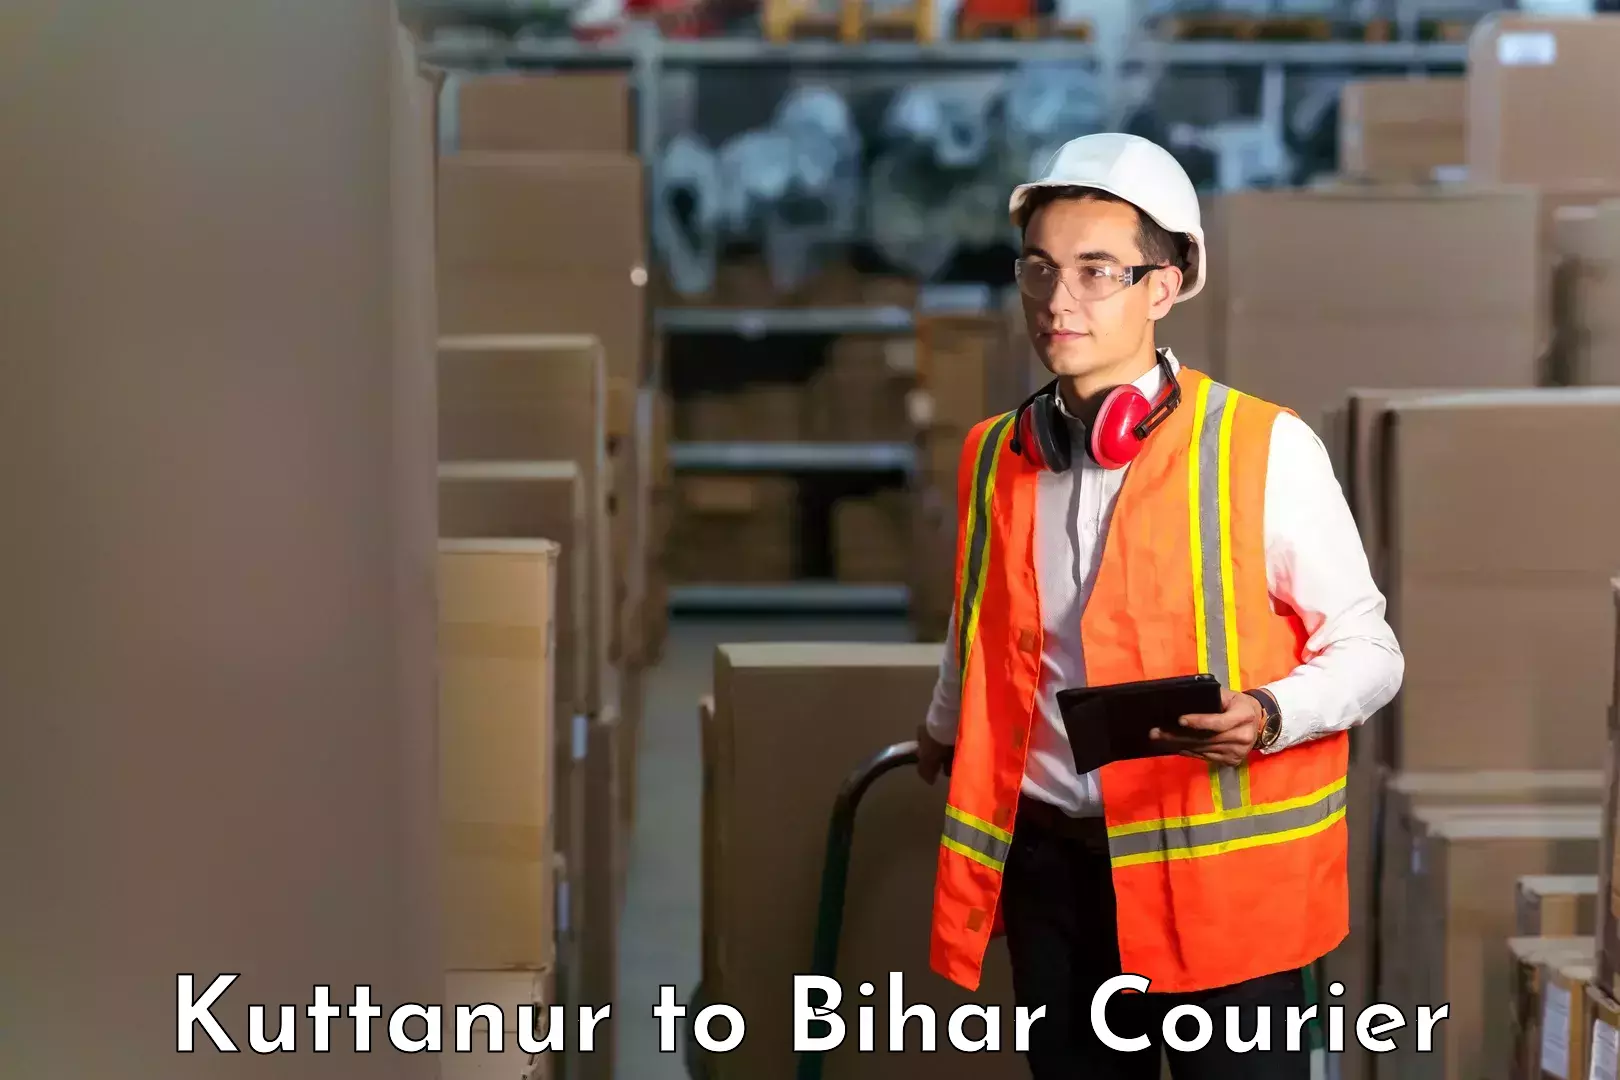 On-call courier service Kuttanur to Simrahi Bazar